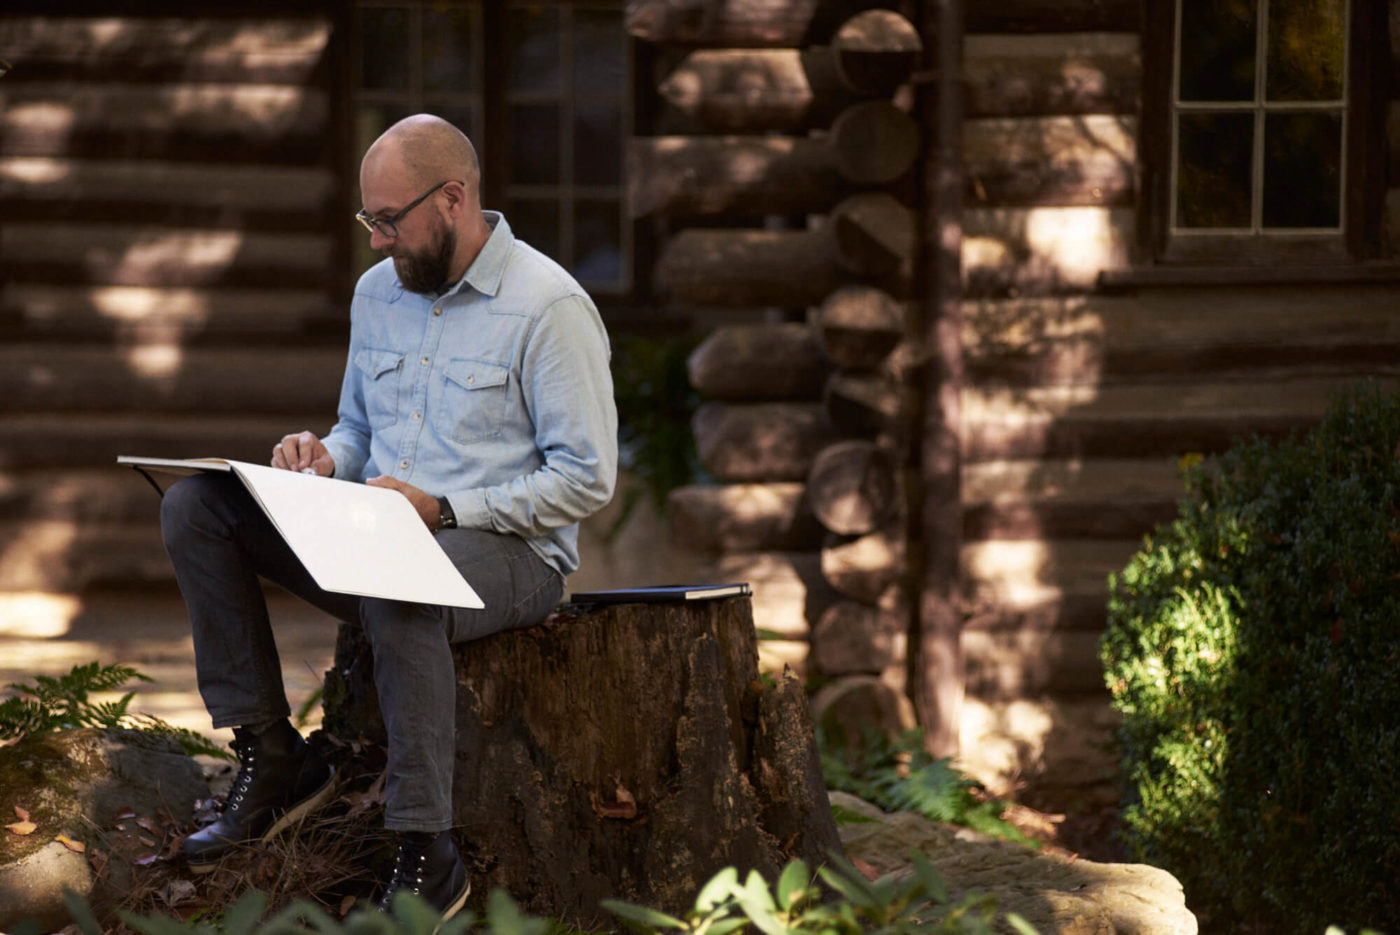 A man dressed in a blue button-down and gray slacks sits outside on a tree stump with a large sketchbook in his lap.